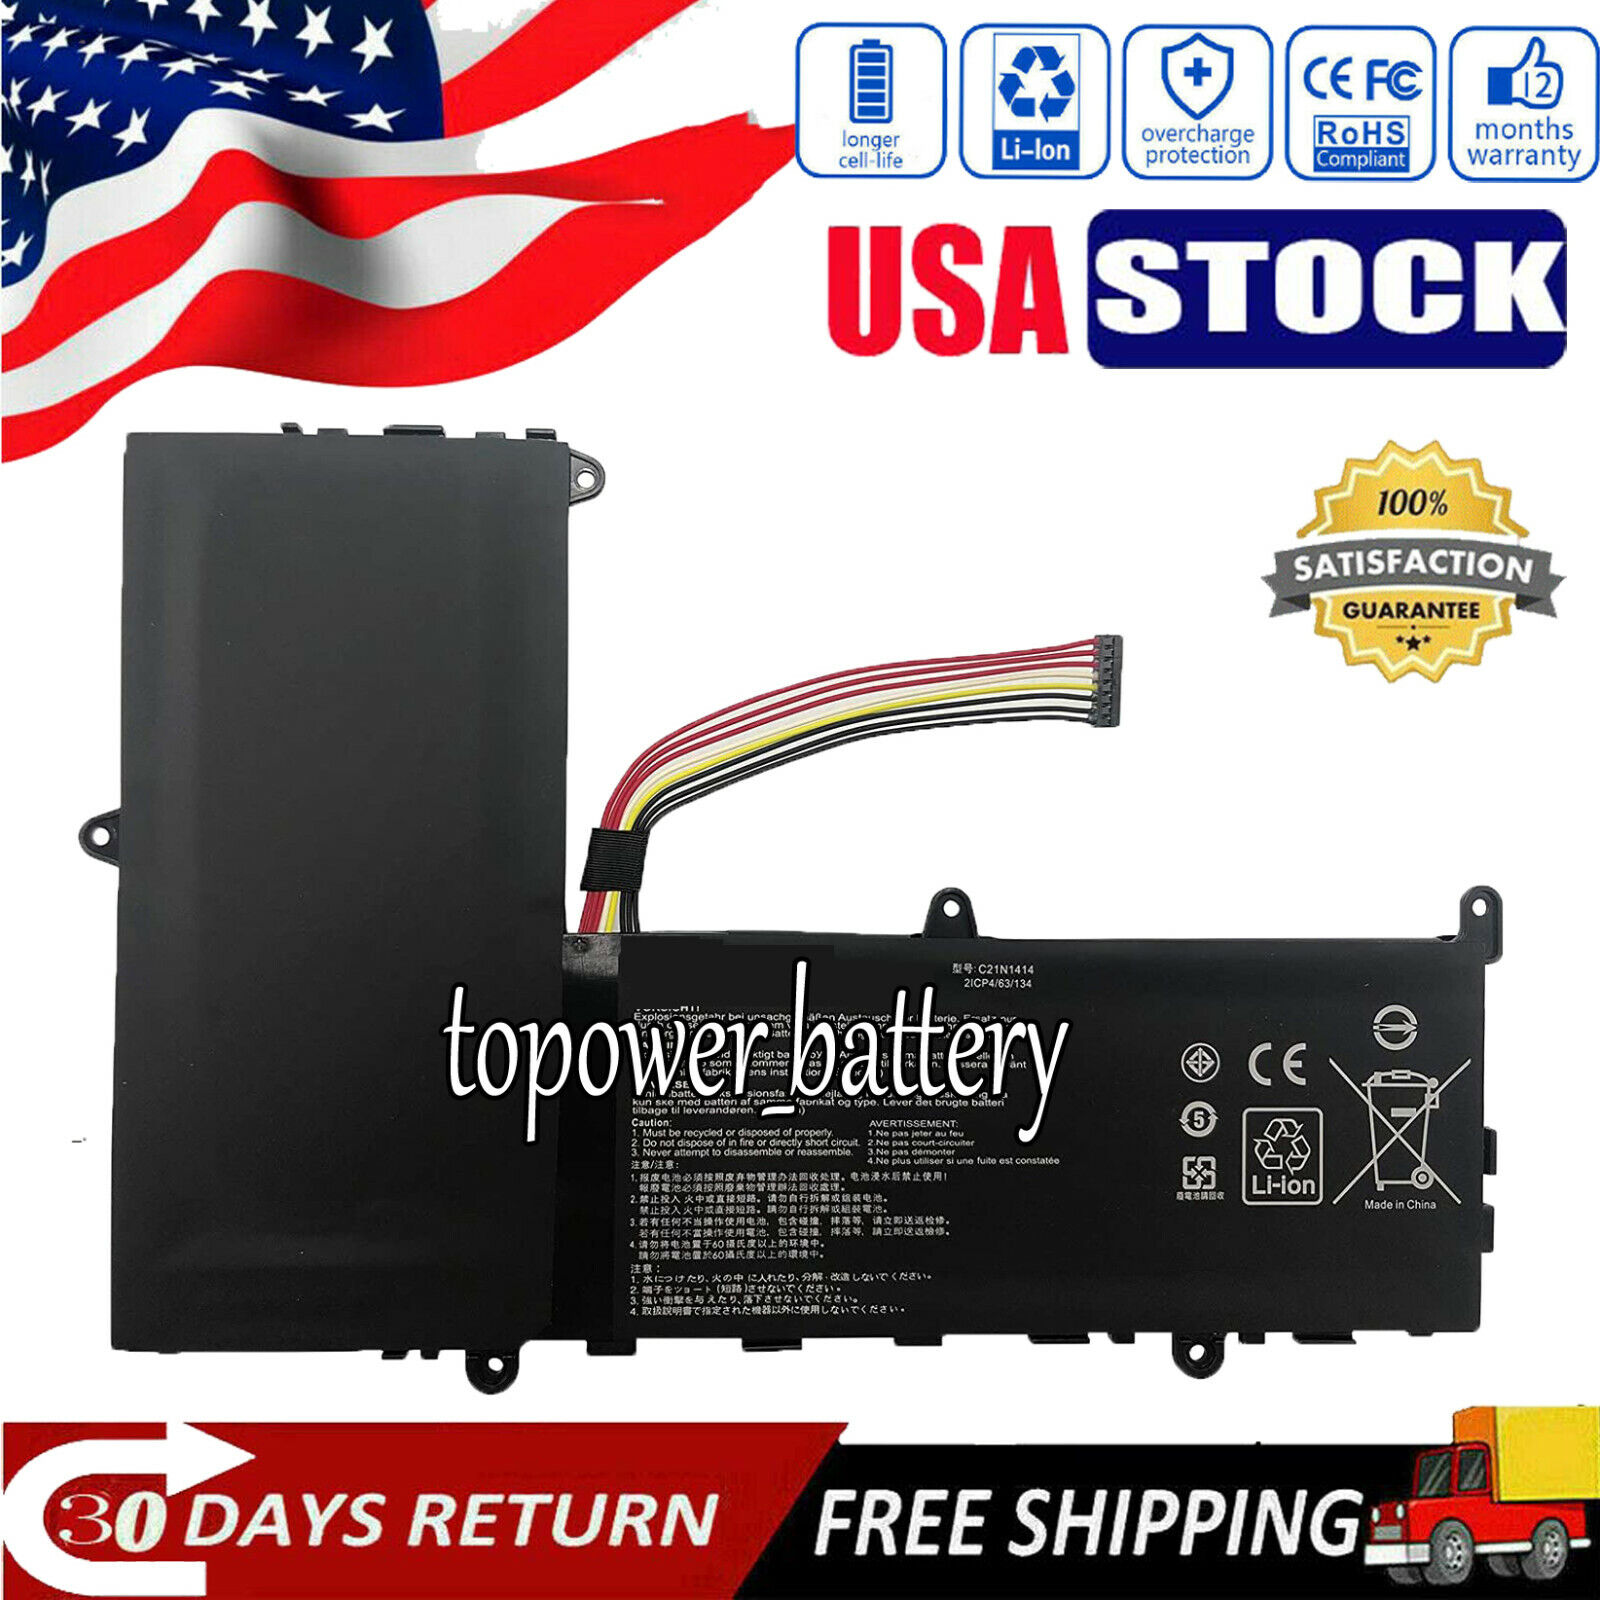 Replacement battery C21N1414 for ASUS EeeBook for X205TA-1A X205TA-1B X205TA3735